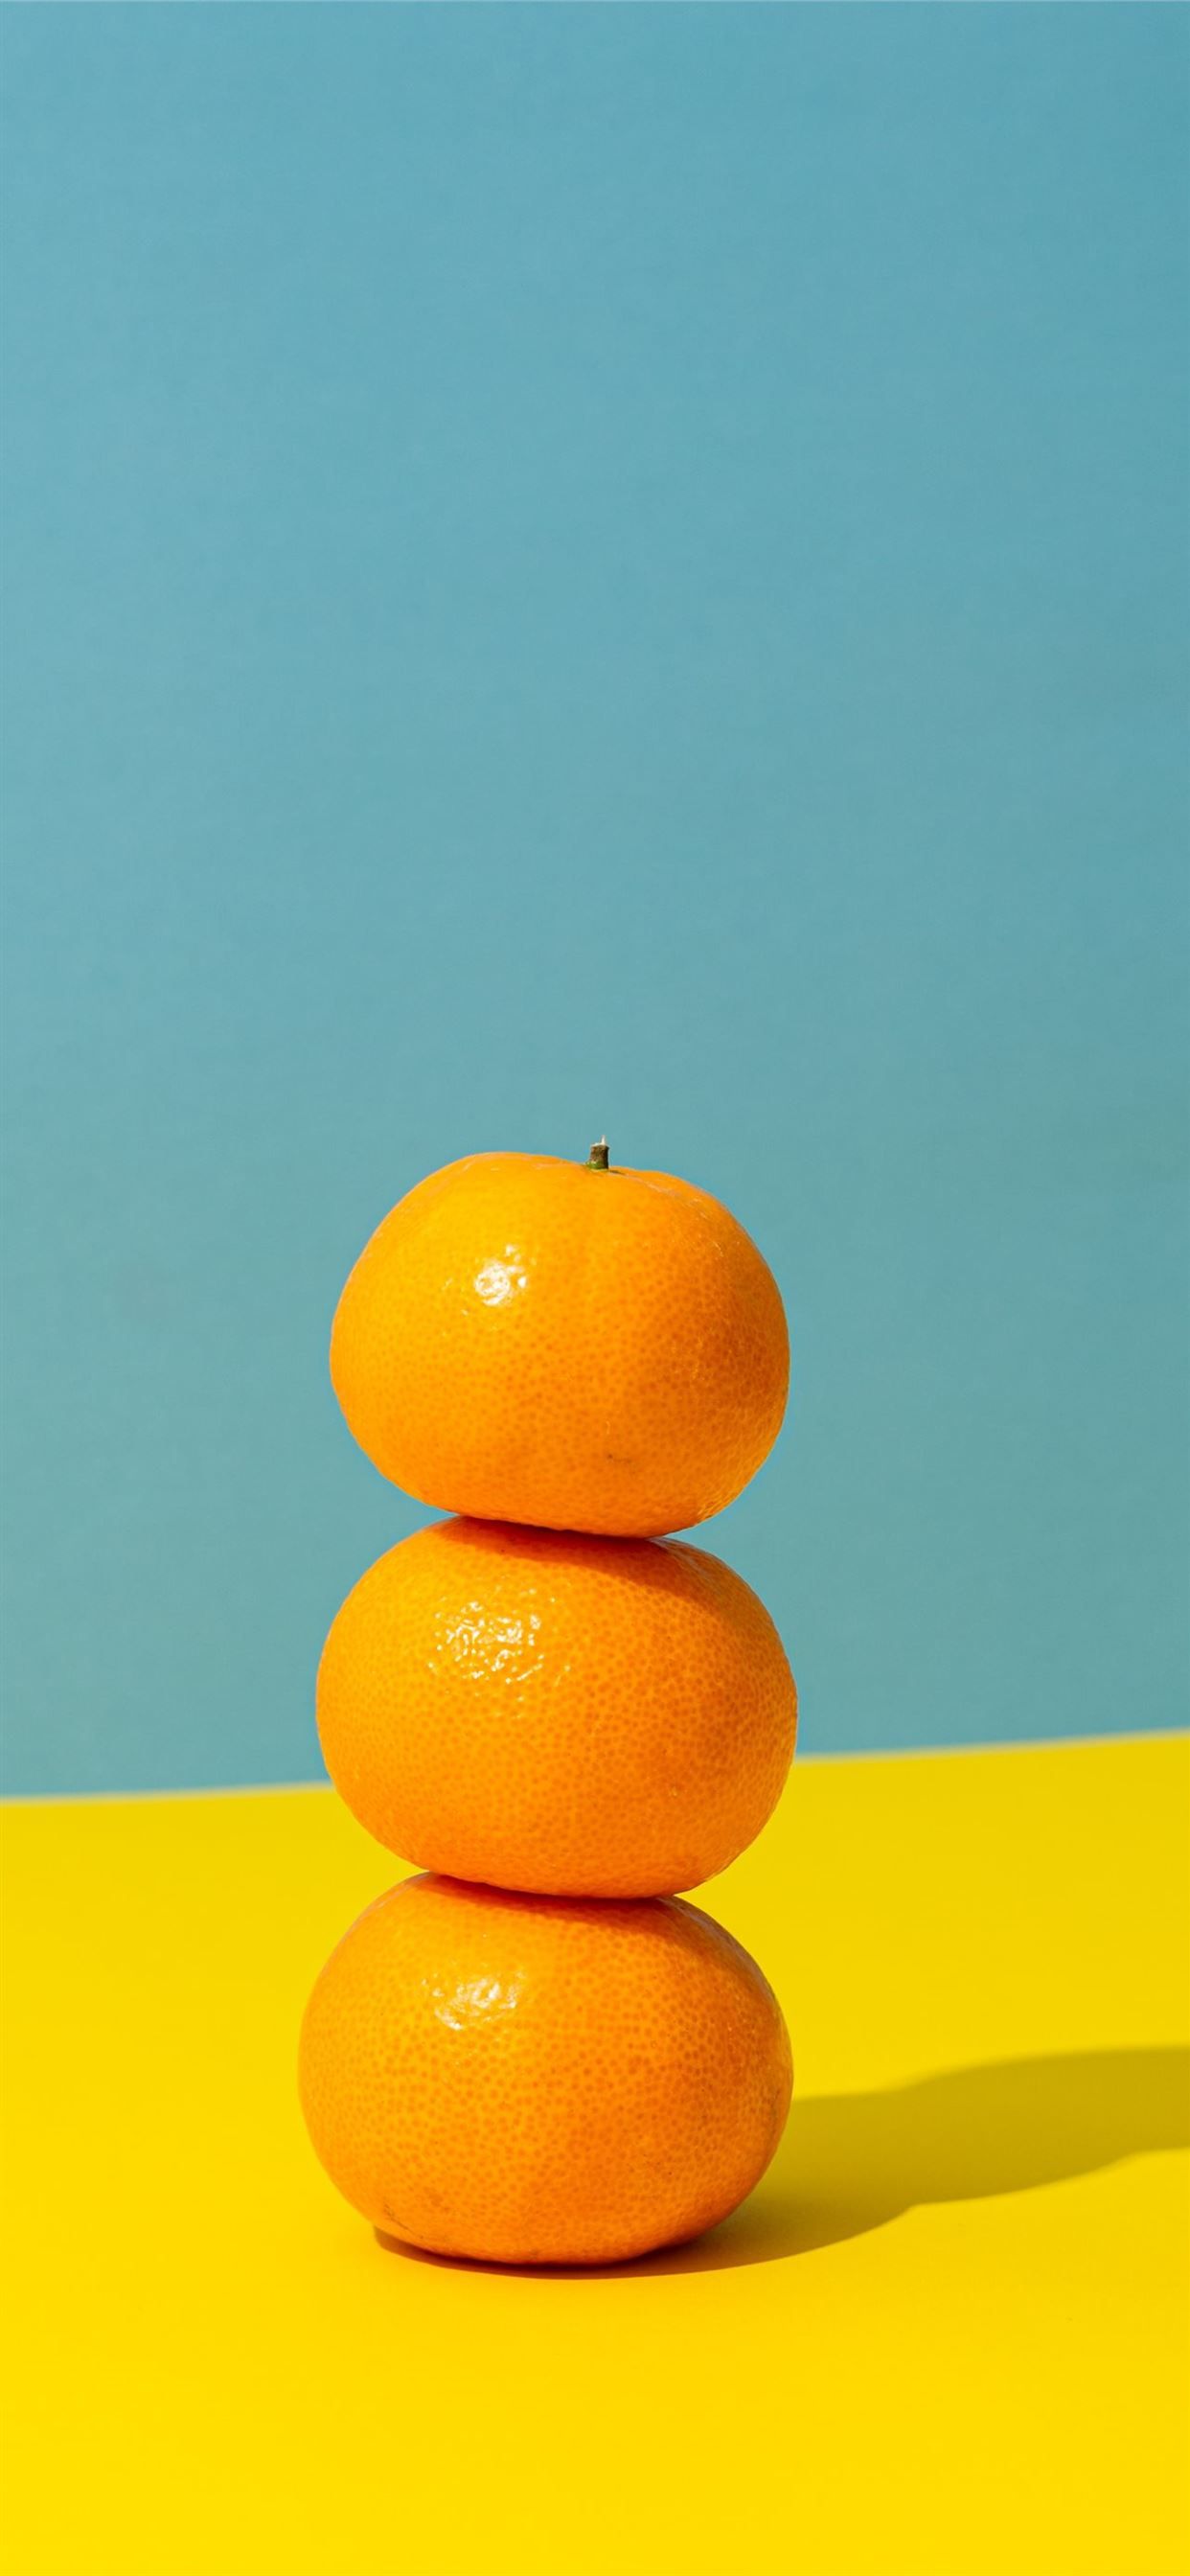 Three oranges stacked on top of each other on a yellow and blue background - Orange, fruit